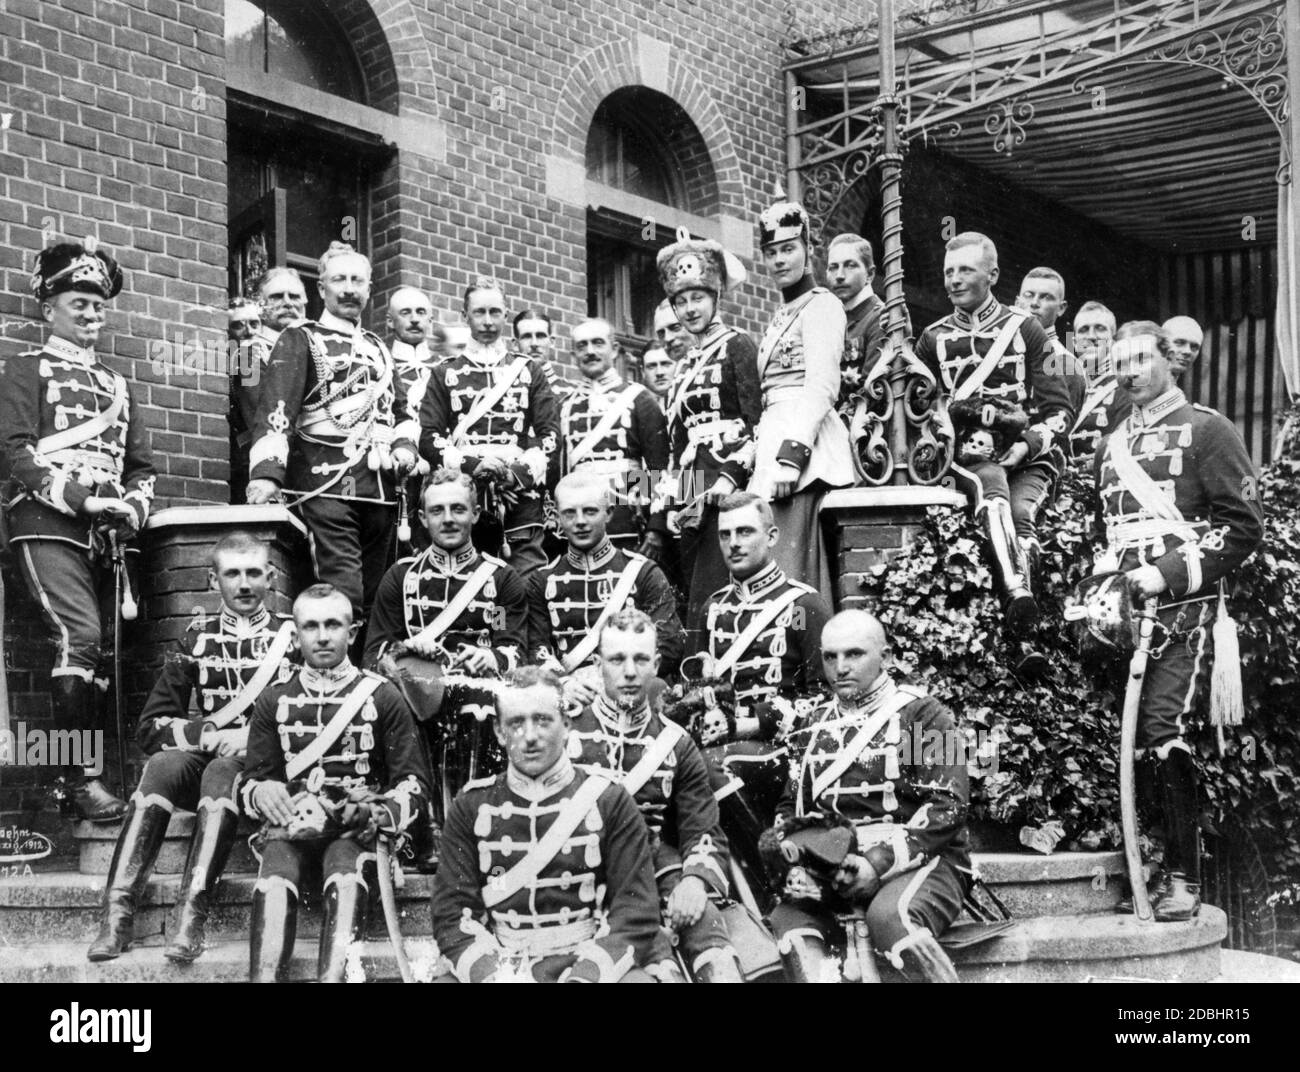 Wilhelm of Prussia as commander of the Danzig Totenkopf Hussars with his officers at the reception of his father Emperor Wilhelm II (both top left side by side). On the right, Princess Victoria Louise of Prussia, sister of the Crown Prince, who married Ernst August of Hanover. Next to her, Crown Princess Cecilie. The Crown Prince had been sent from Berlin by his father to serve in the provincial garrison, because of his amorous and private escapades. Stock Photo